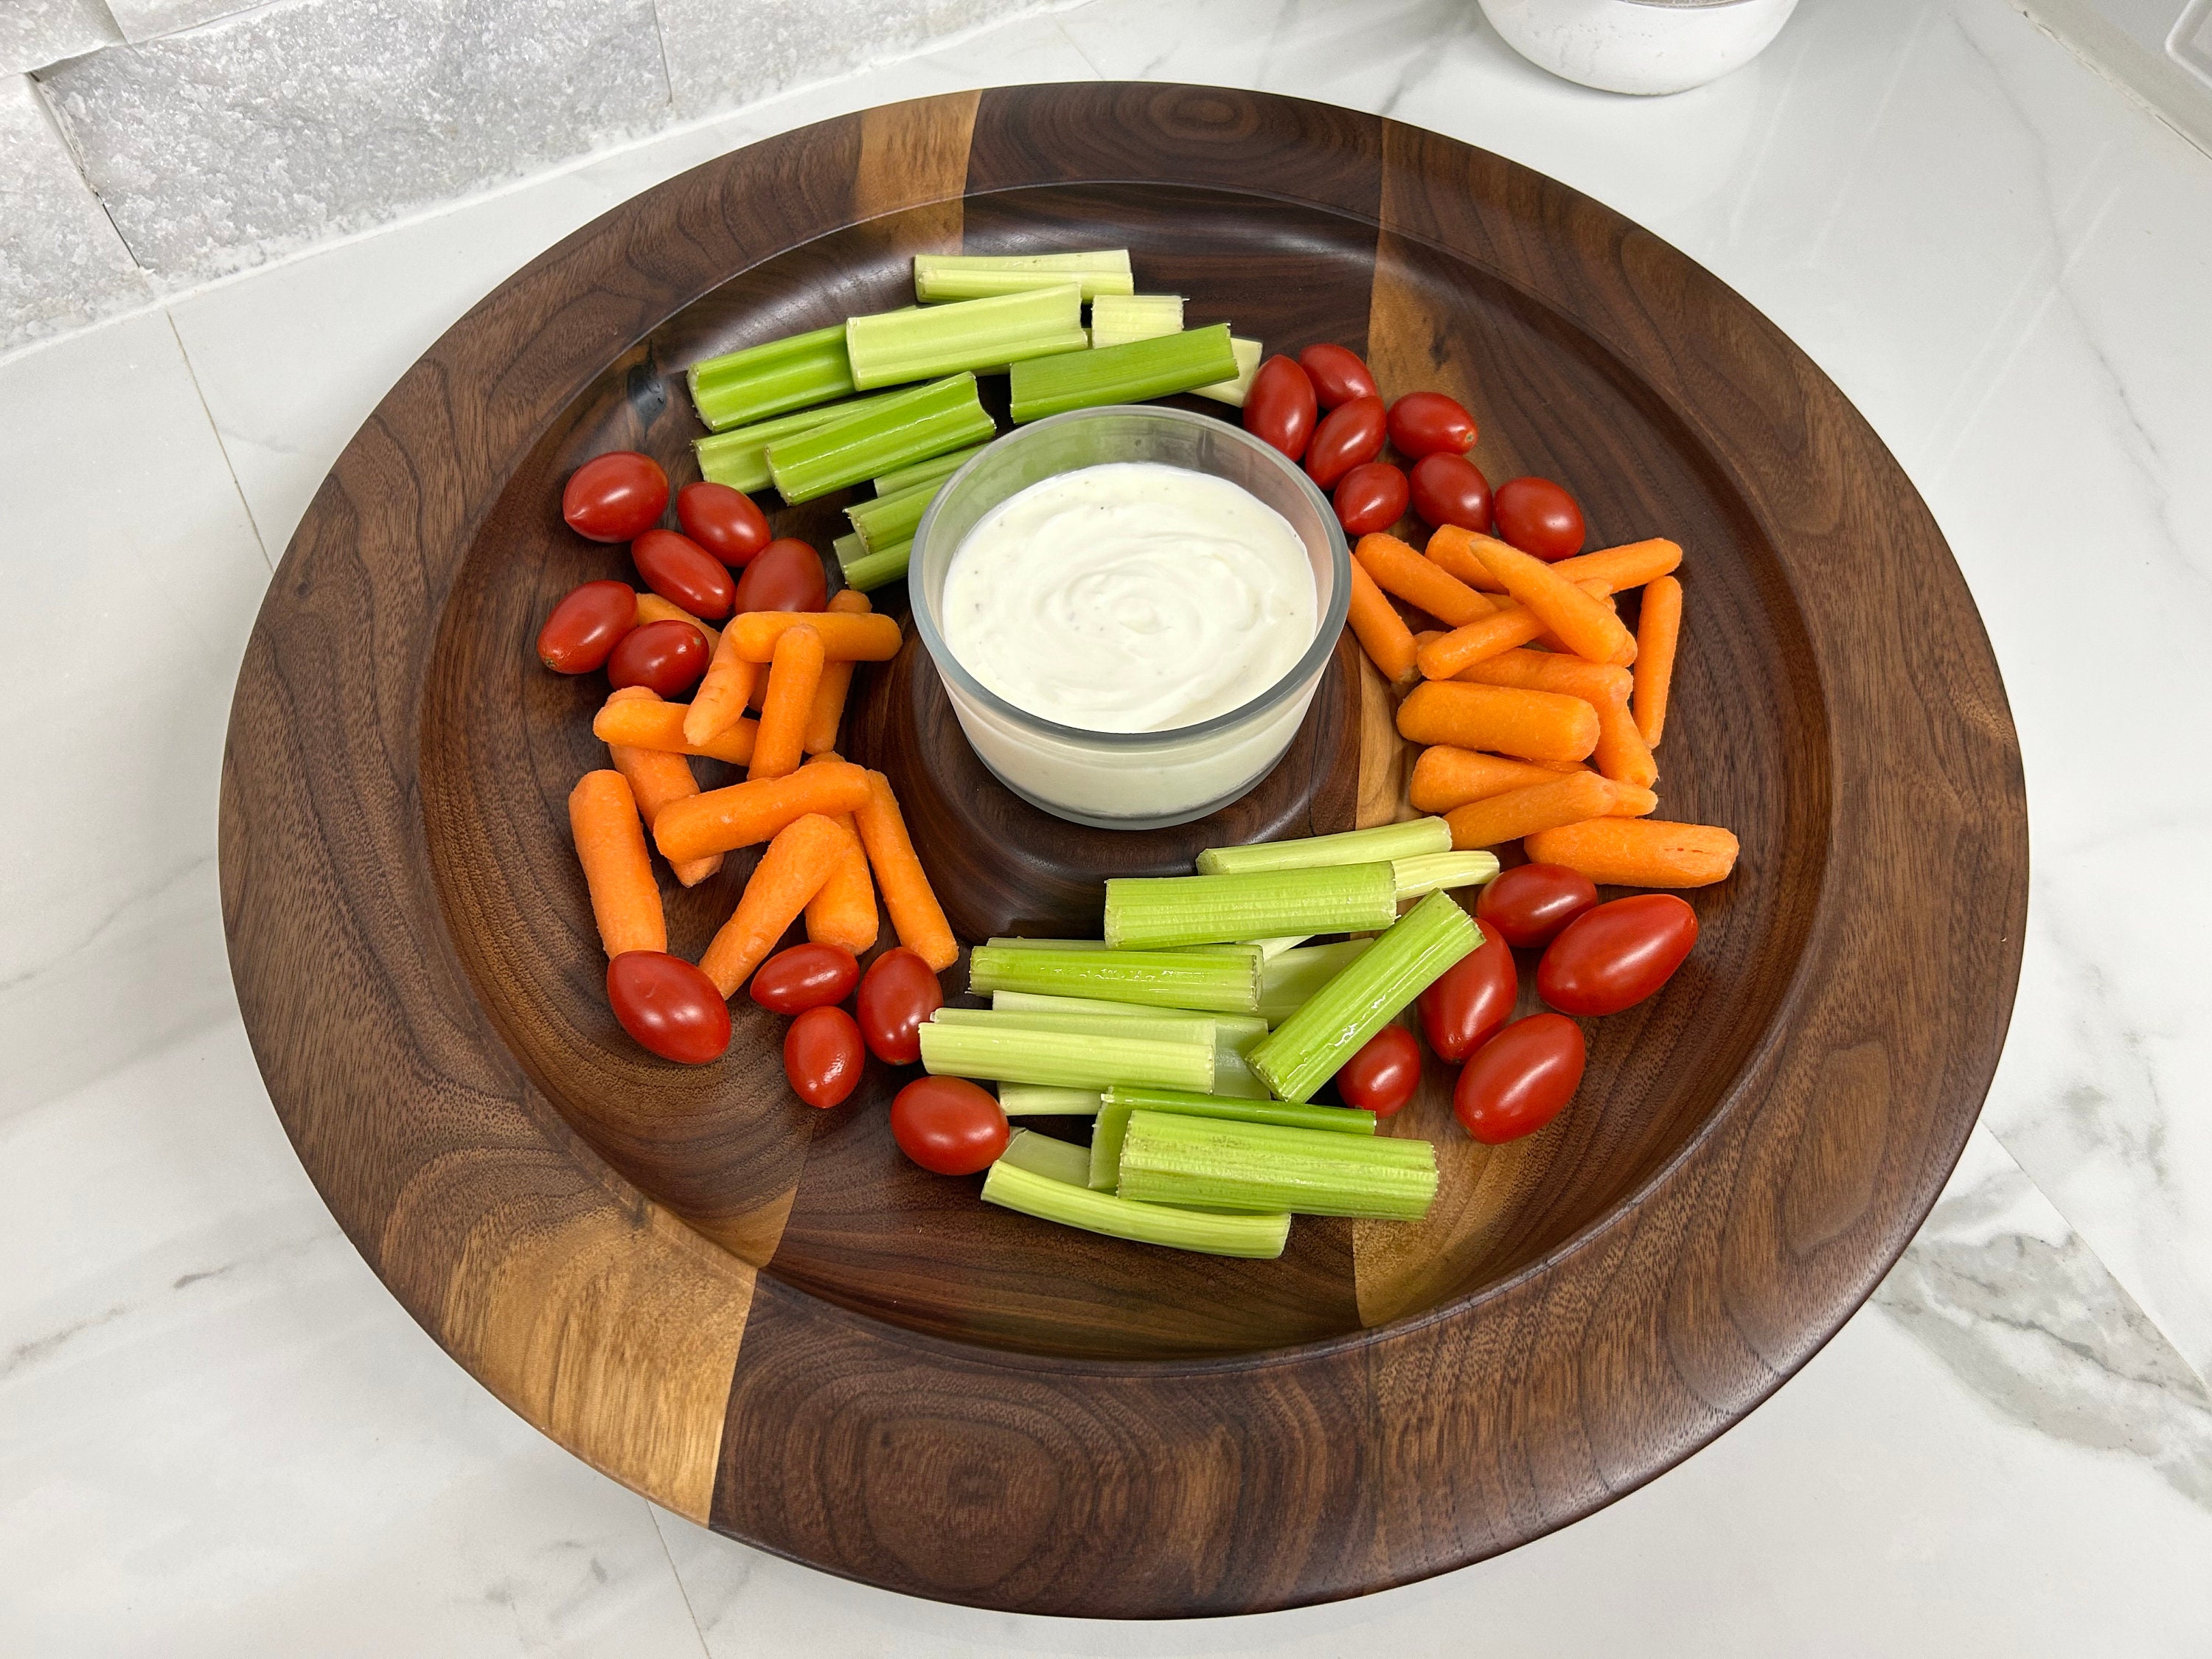 Divided Veggie Tray with Lid Stackable Vegetable Storage Appetizer Relish Serving Platter with 4 Compartment Snack Containers for Food Fruit